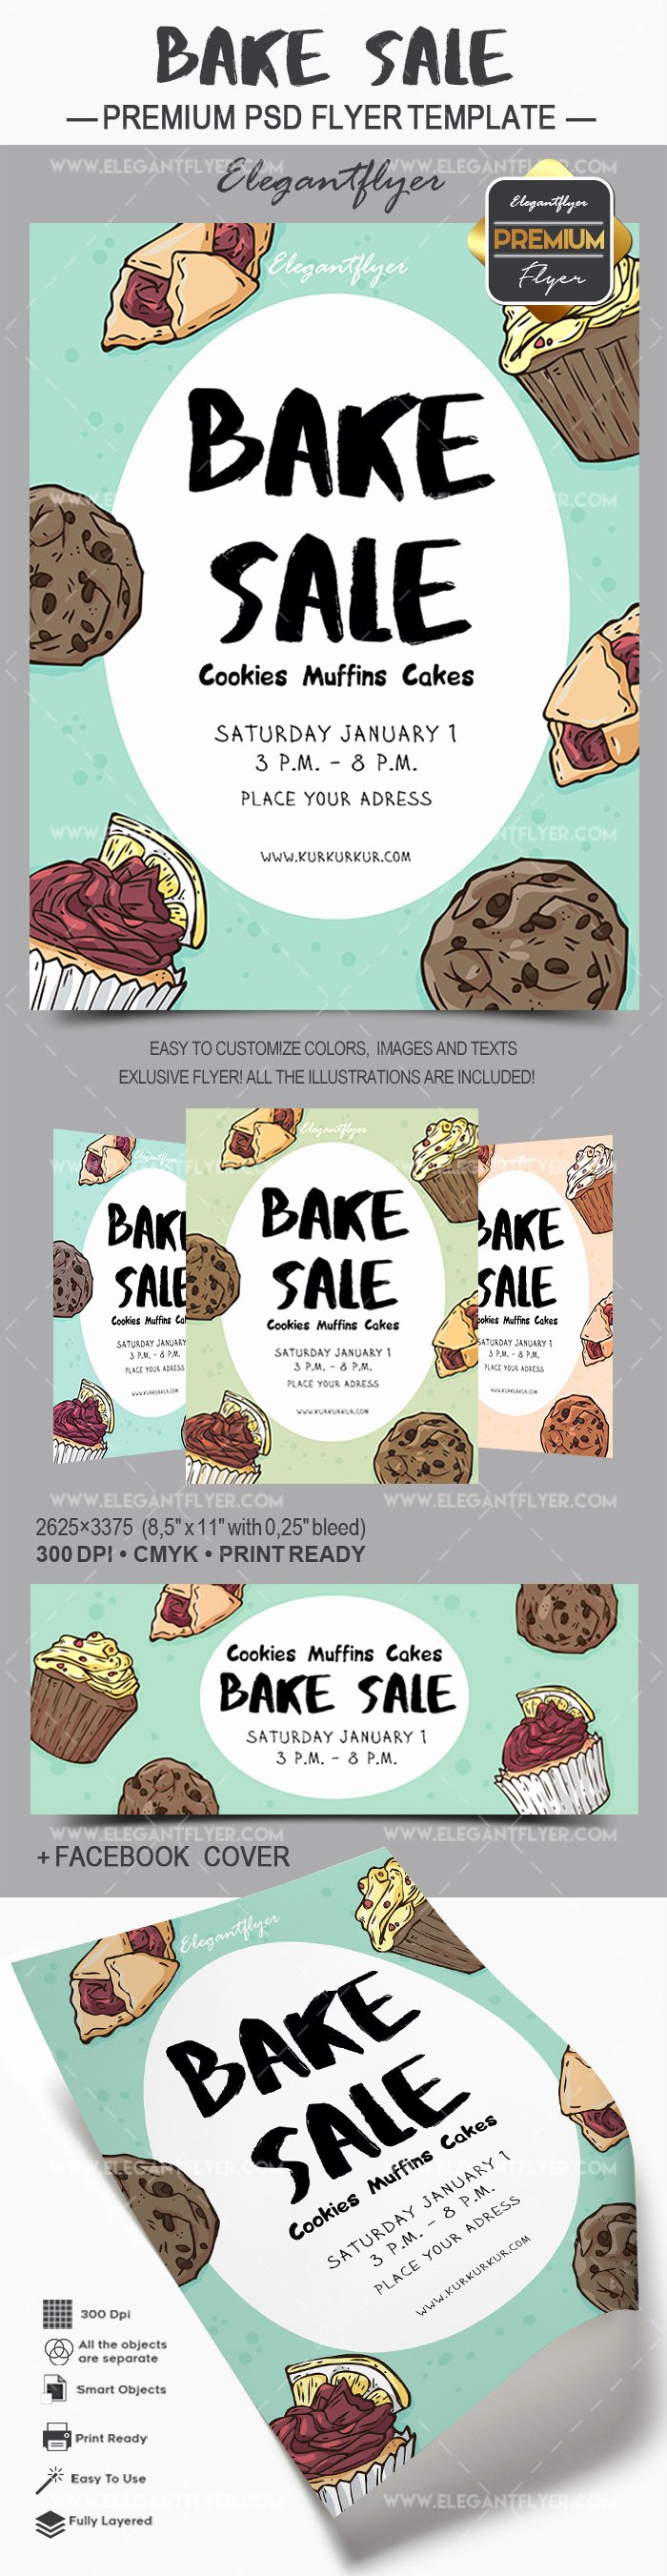 Free Printable Bake Sale Flyers Lovely Flyer for Bake Sale Cookies Muffins Cakes – by Elegantflyer